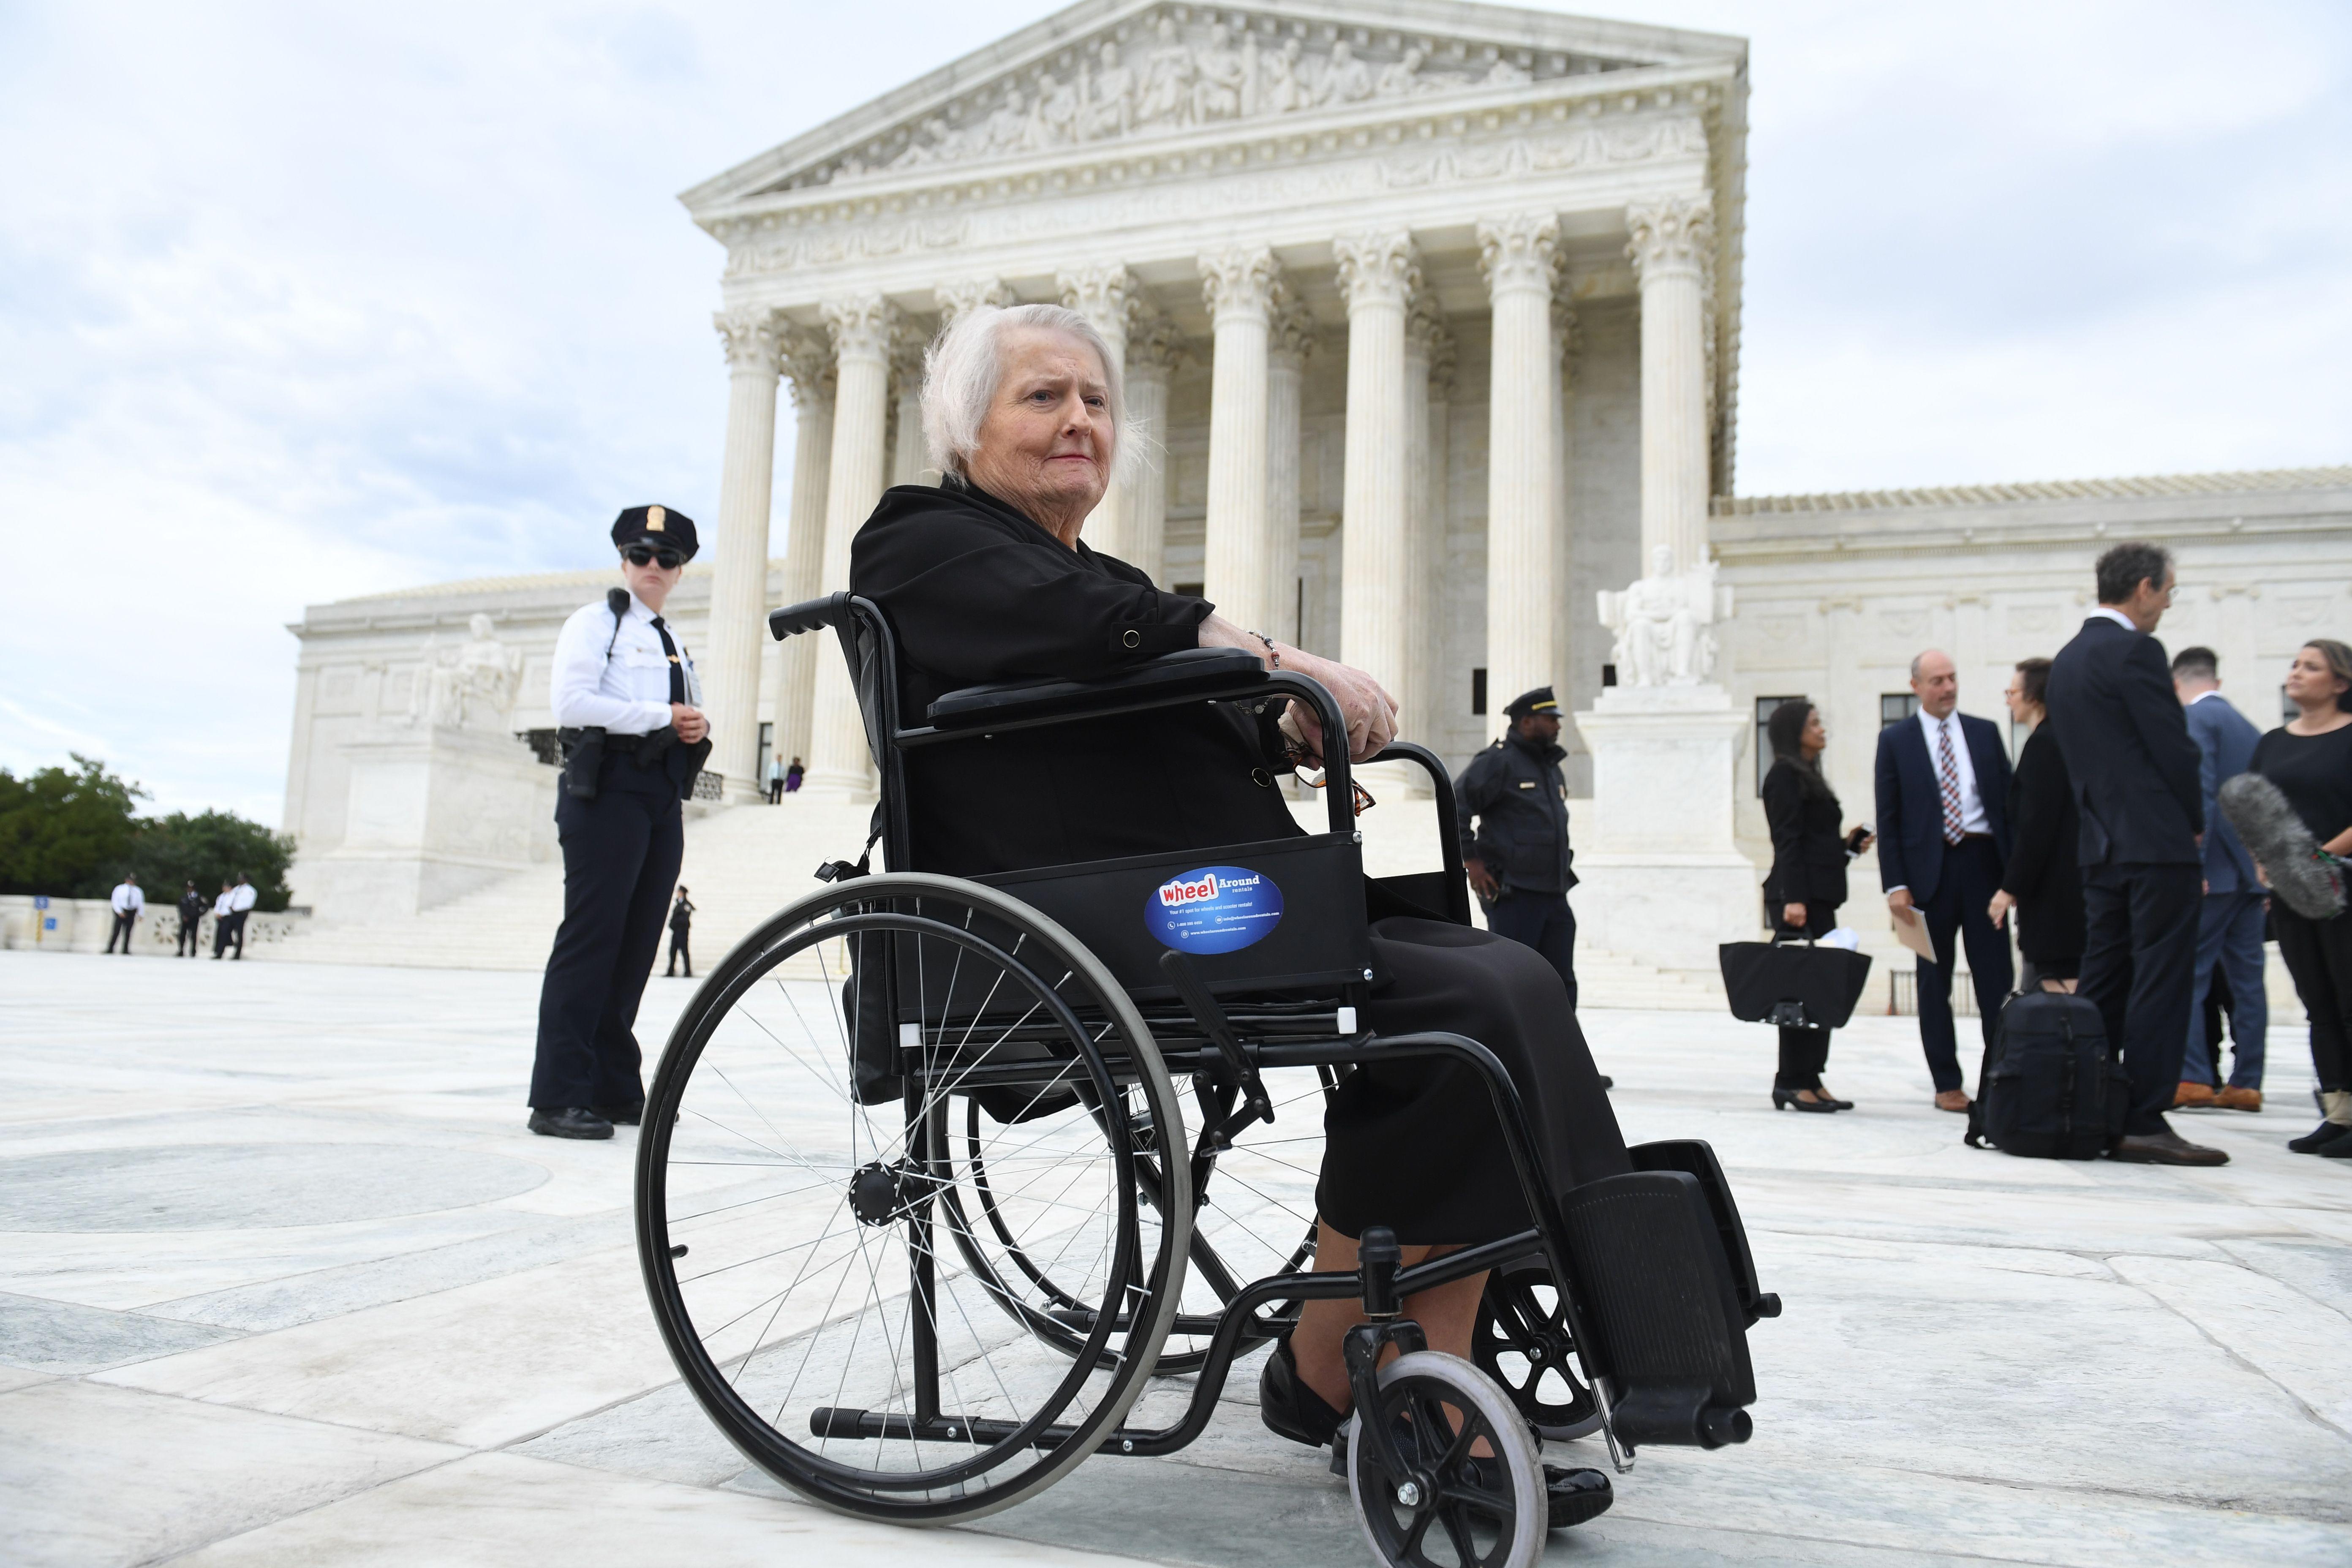 Aimee Stephens in front of the Supreme Court in her wheelchair.